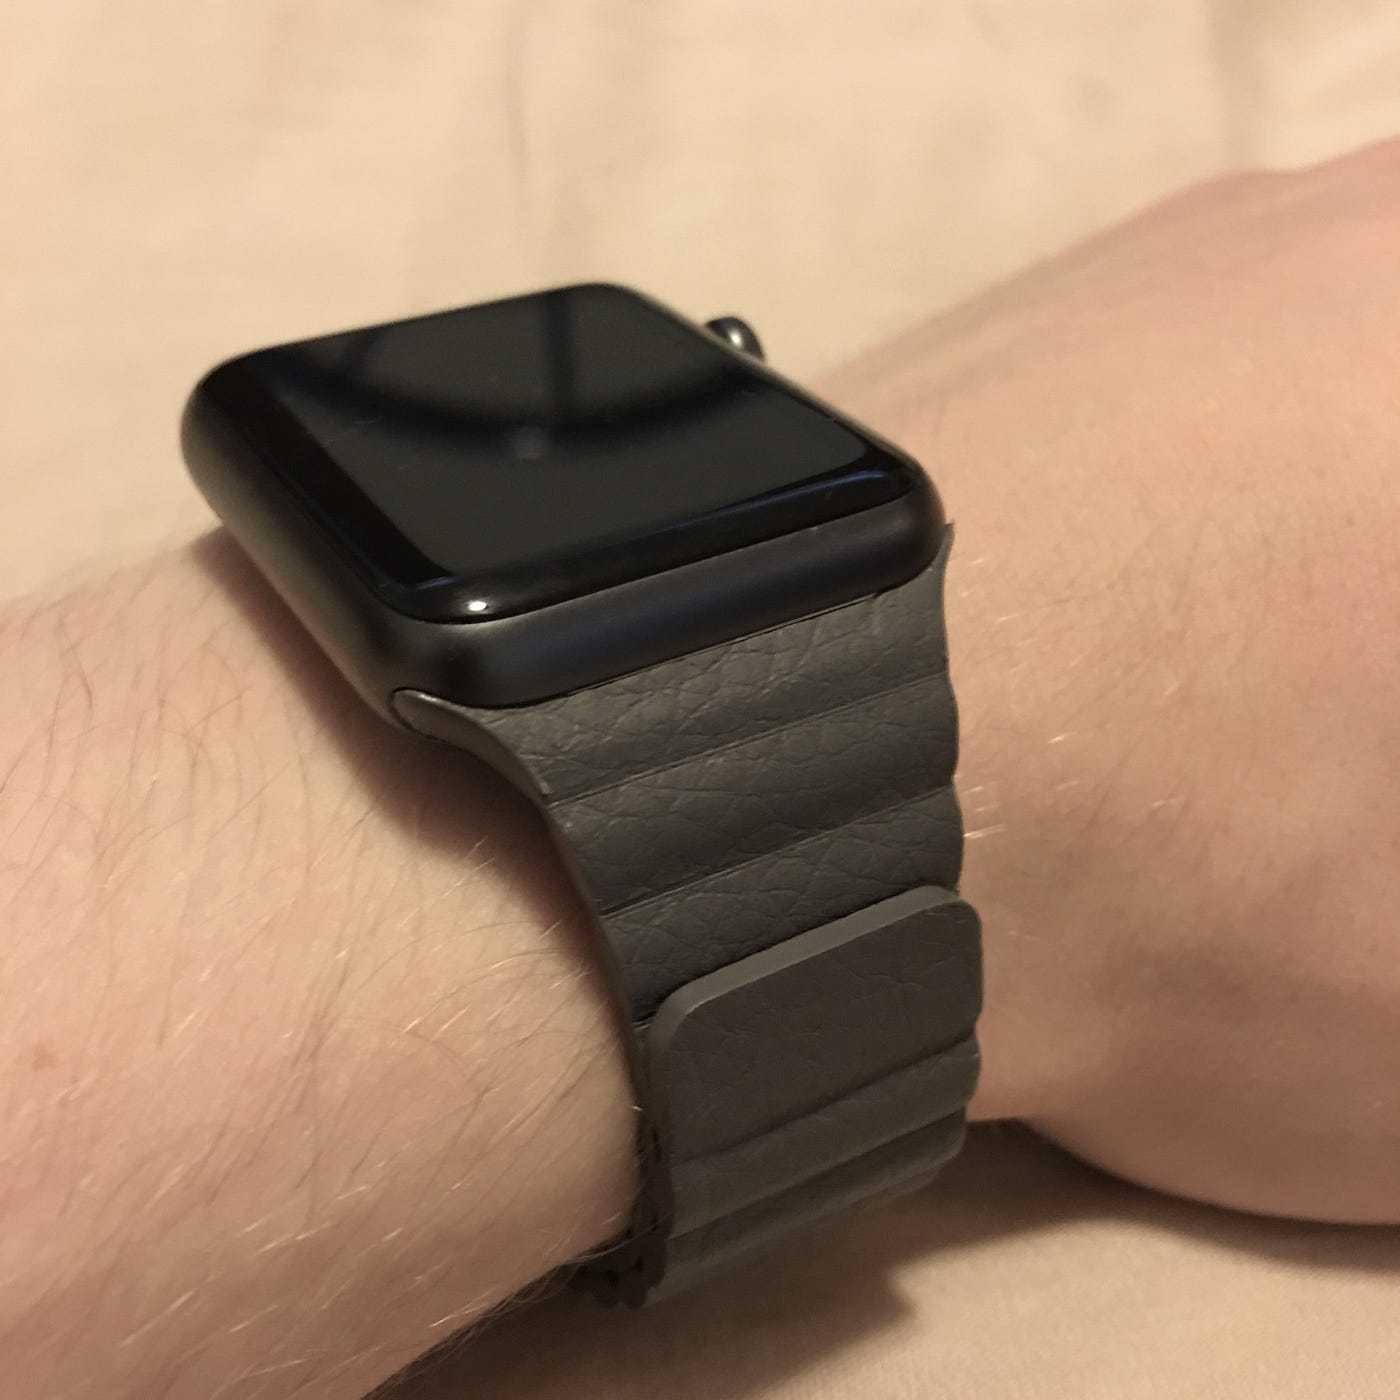 Third Party Leather Loop Apple Watch Band Review | by Erik Peterman | Tech:  News, and Opinions | Medium